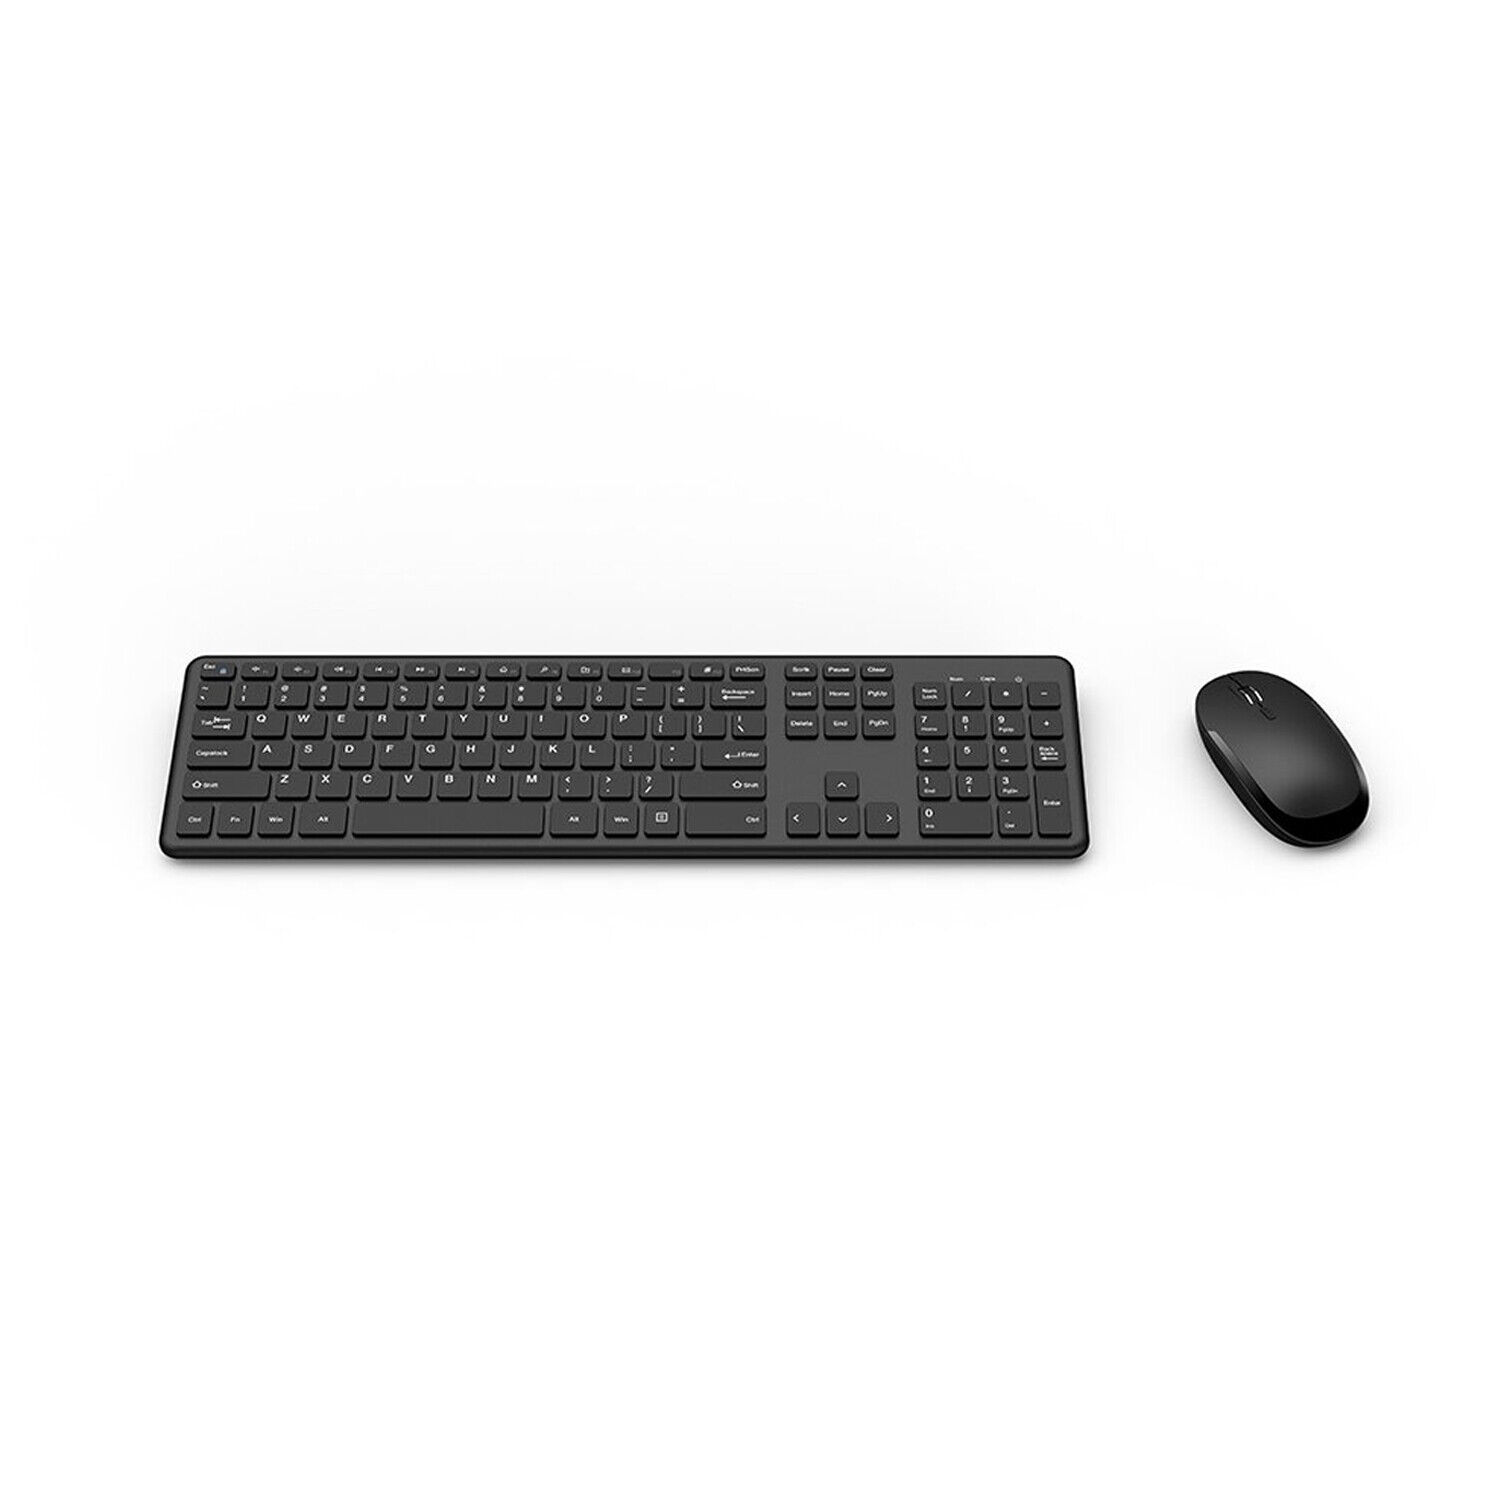 KM1 Wireless Keyboard and Mouse Set 2.4 GHz wireless USB Receiver For PC Laptop